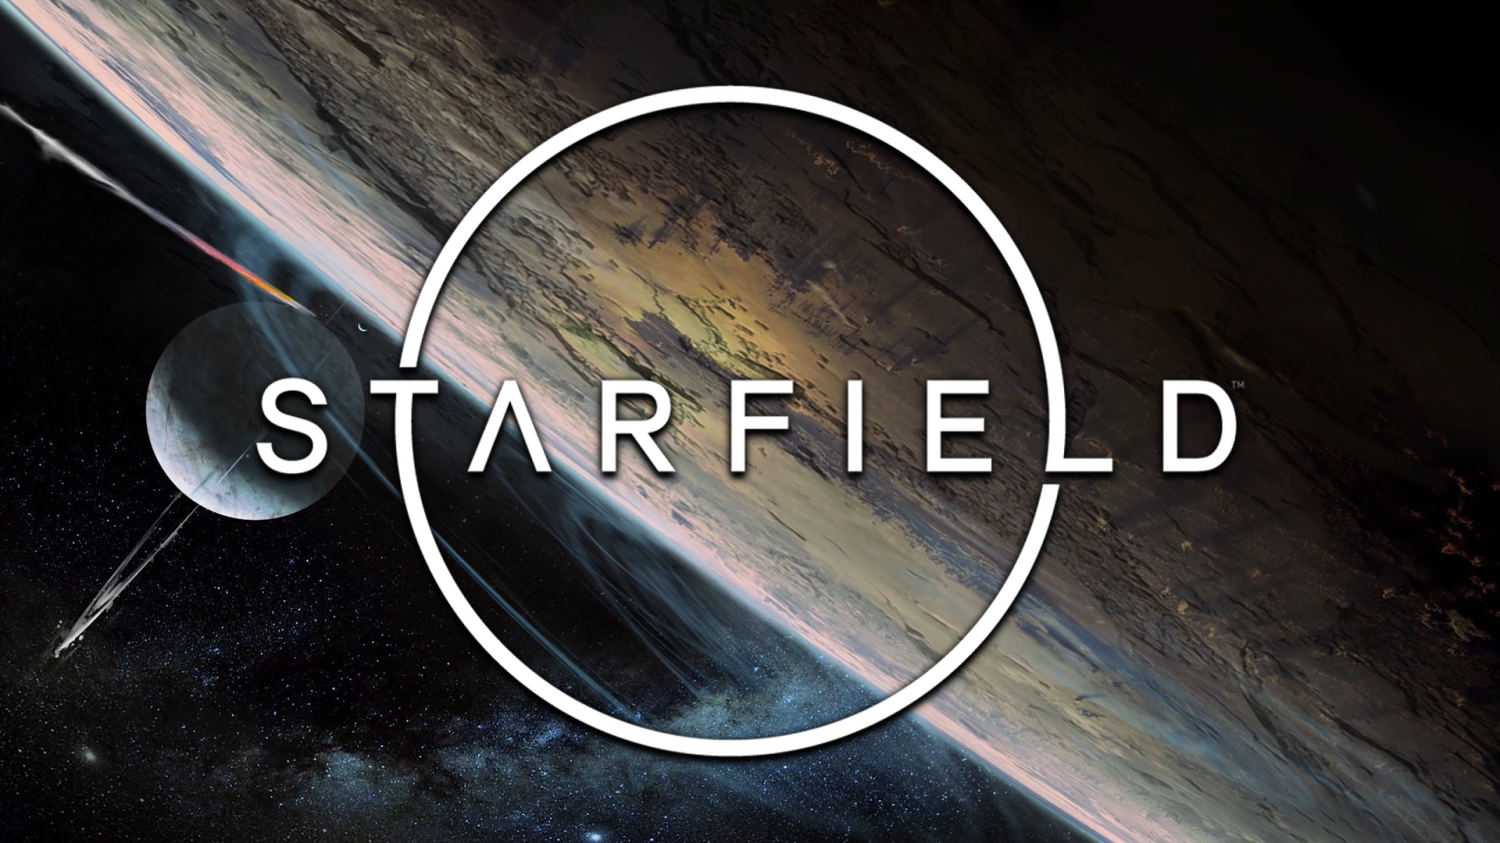 Starfield Console Commands Guide: God Mode Cheats, Free Cam Mode, and More